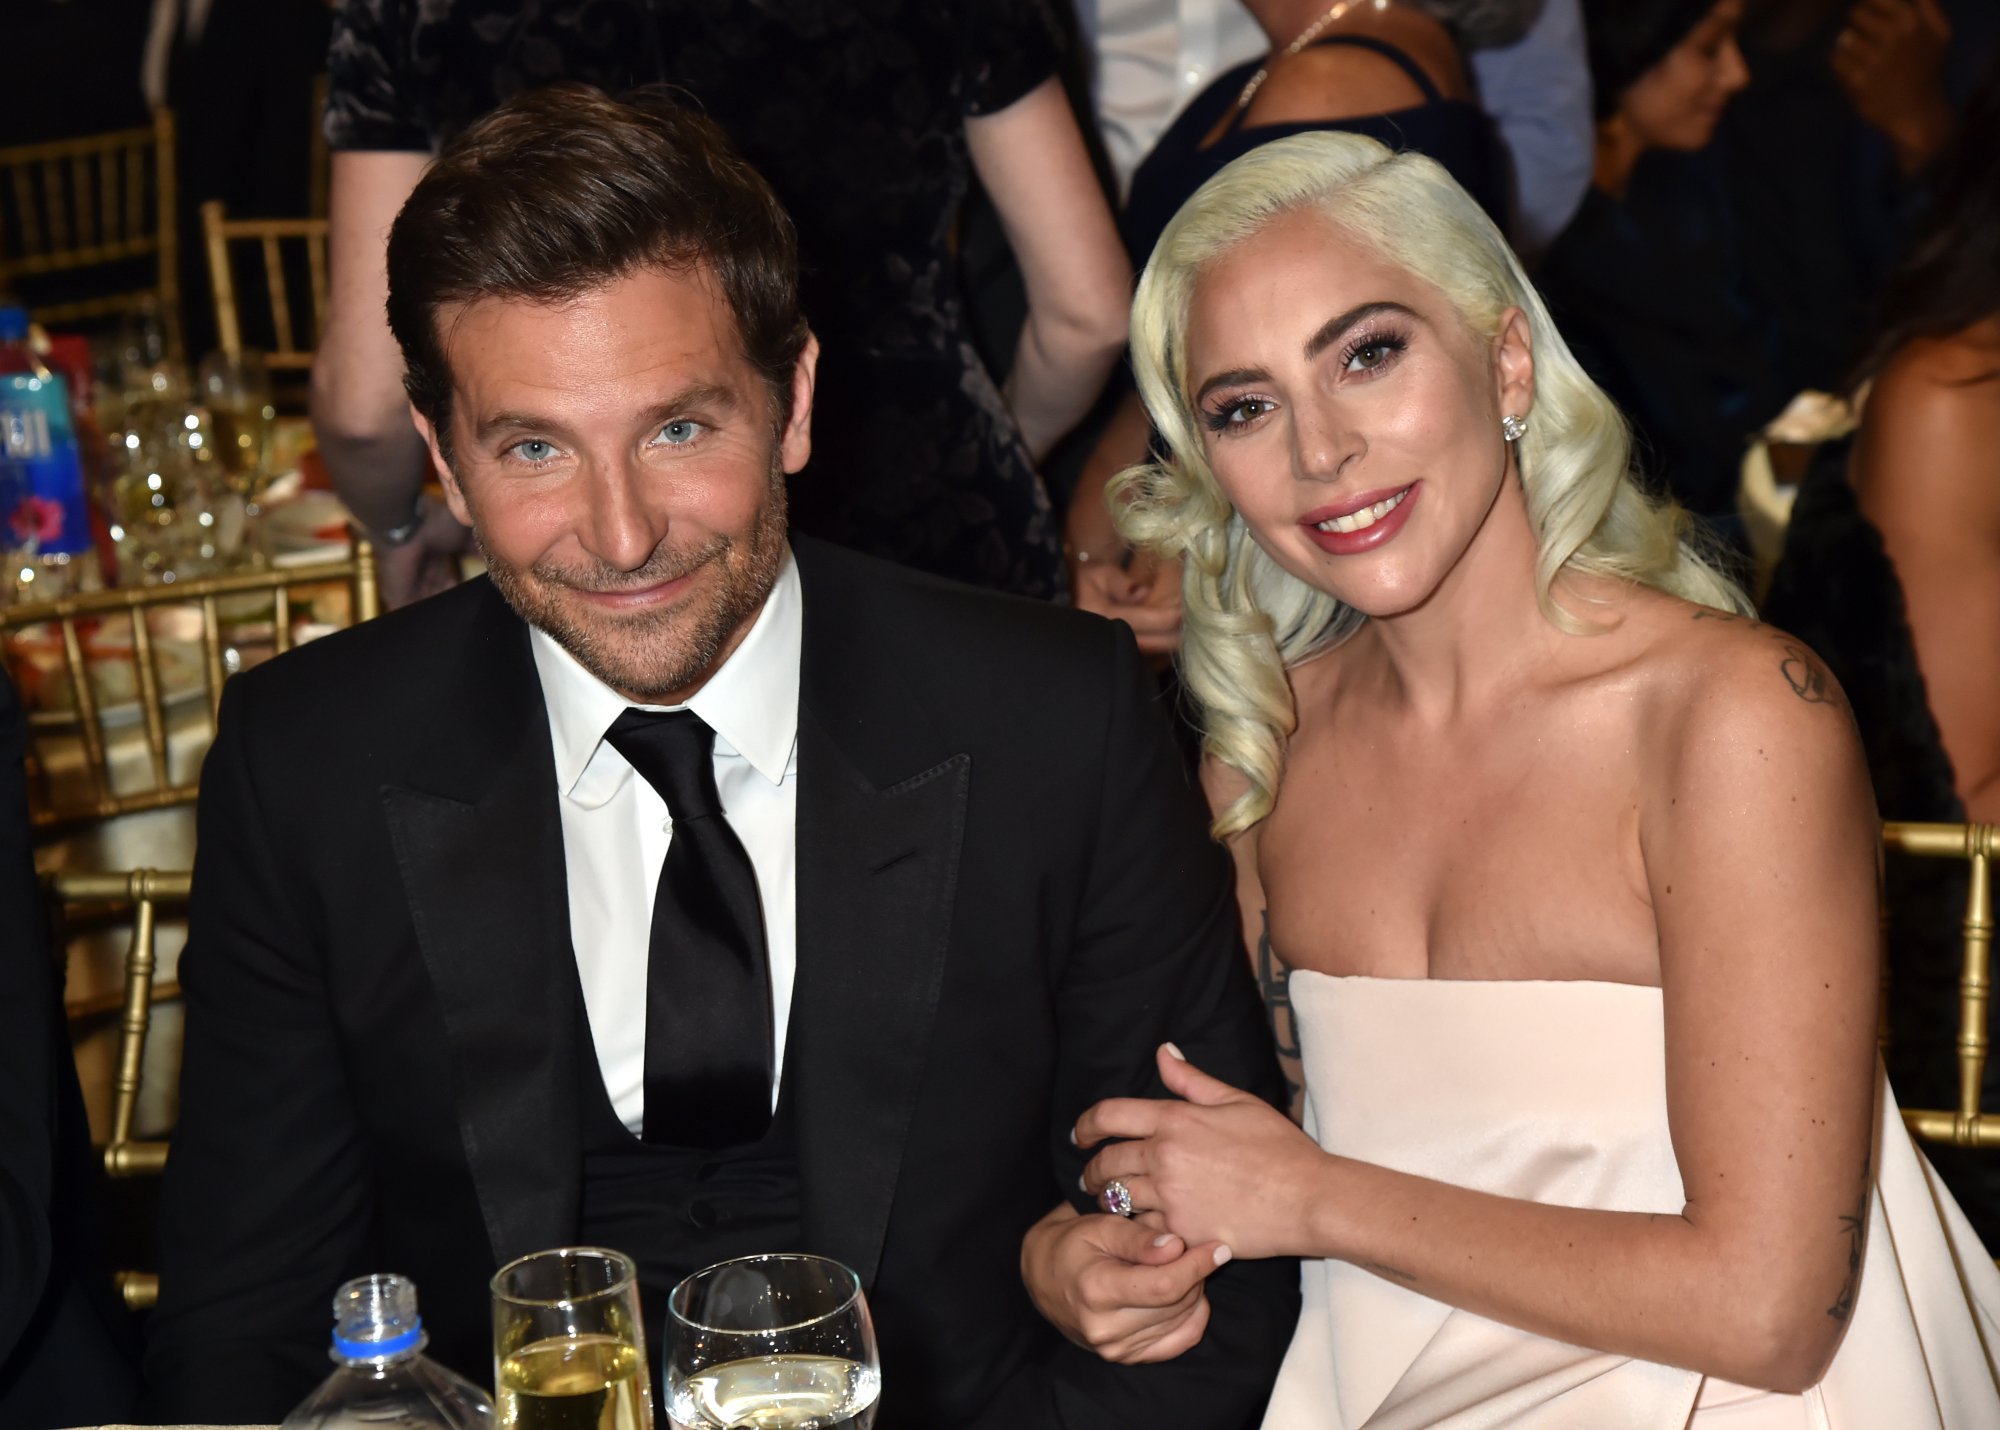 'A Star Is Born' actors Bradley Cooper and Lady Gaga smiling at their table at the Critics' Choice Awards